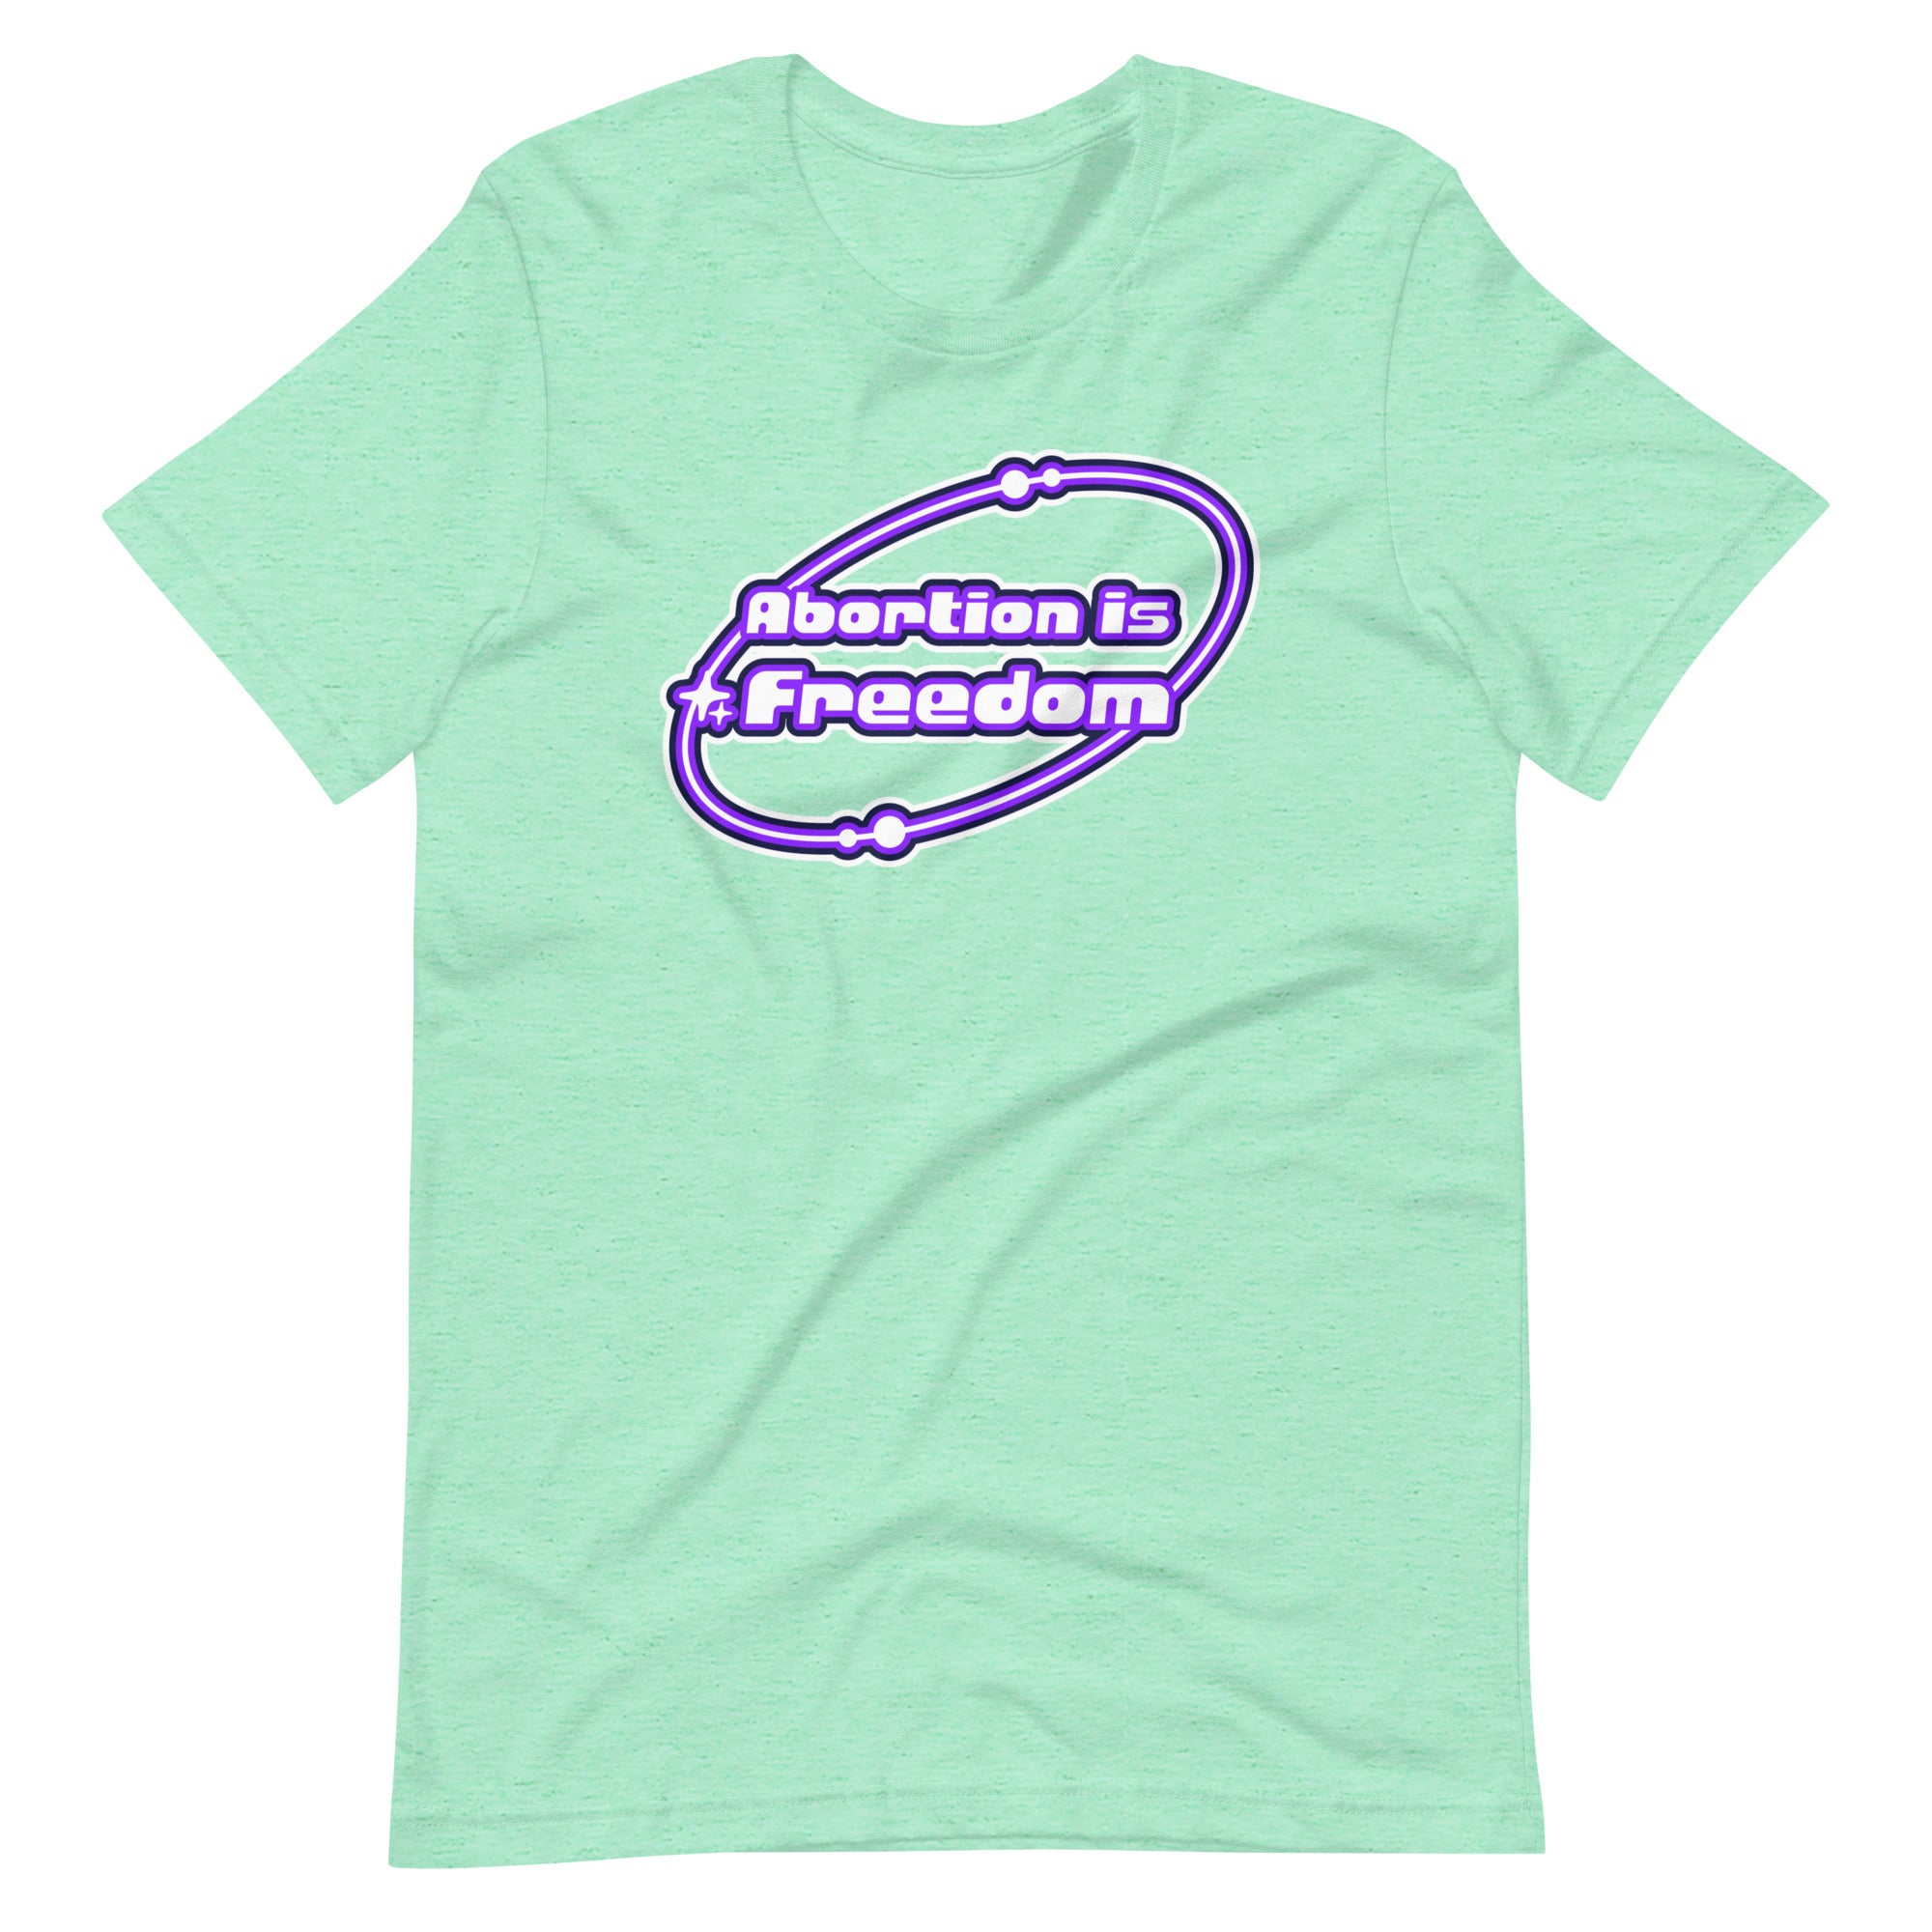 Abortion Is Freedom Unisex Feminist T-shirt Shop Women’s Rights T-shirts - Feminist Trash Store - Heather Mint  